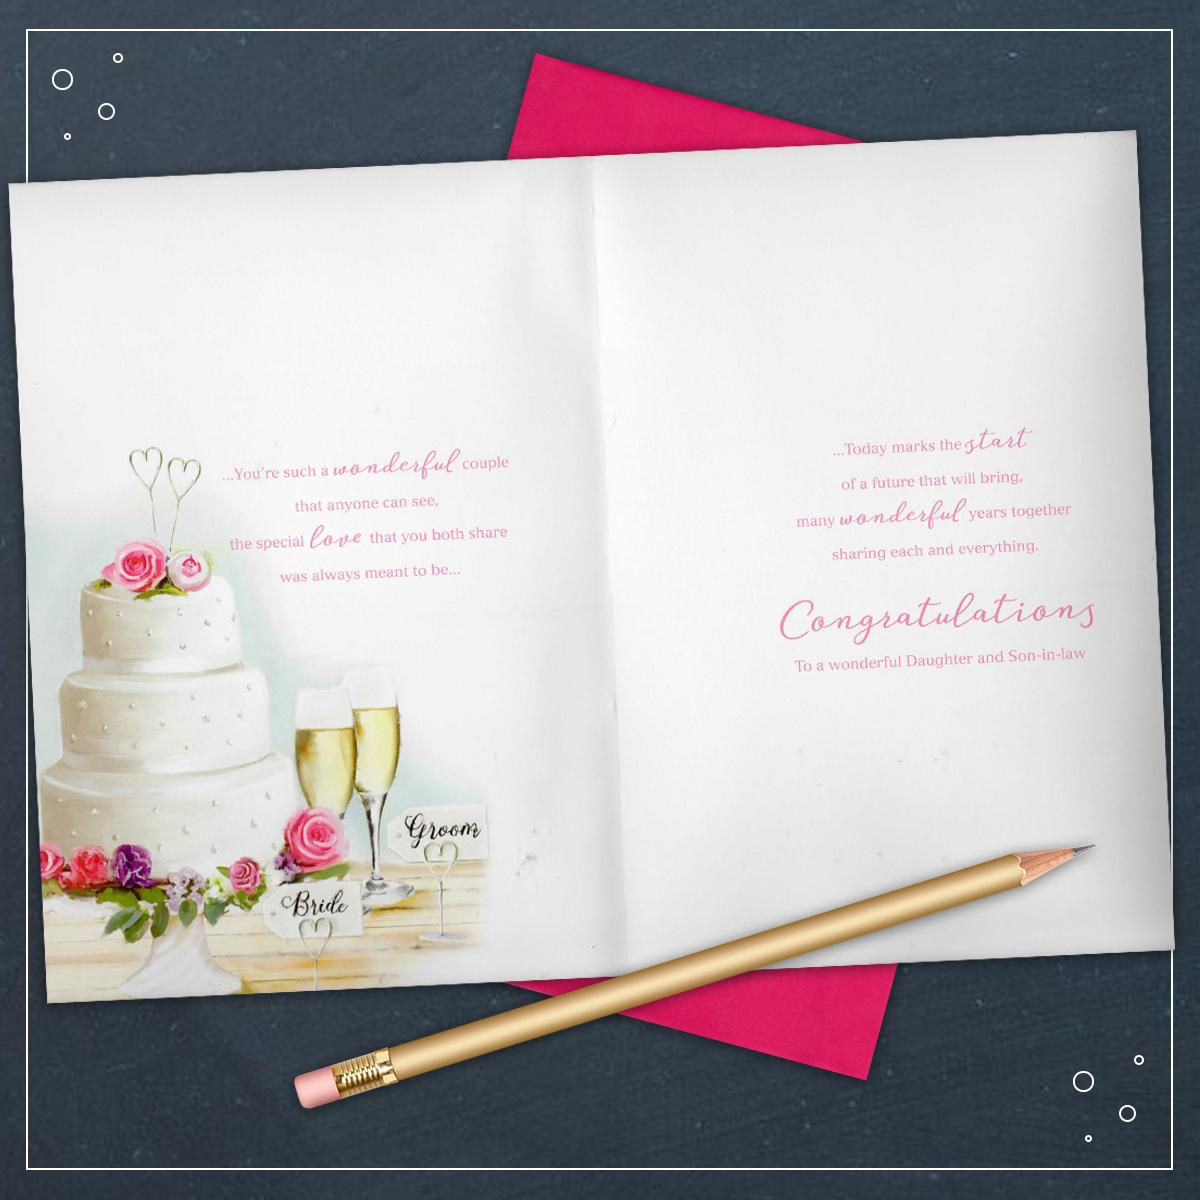 Inside Of Daughter Wedding Card Showing Layout And Printed Text